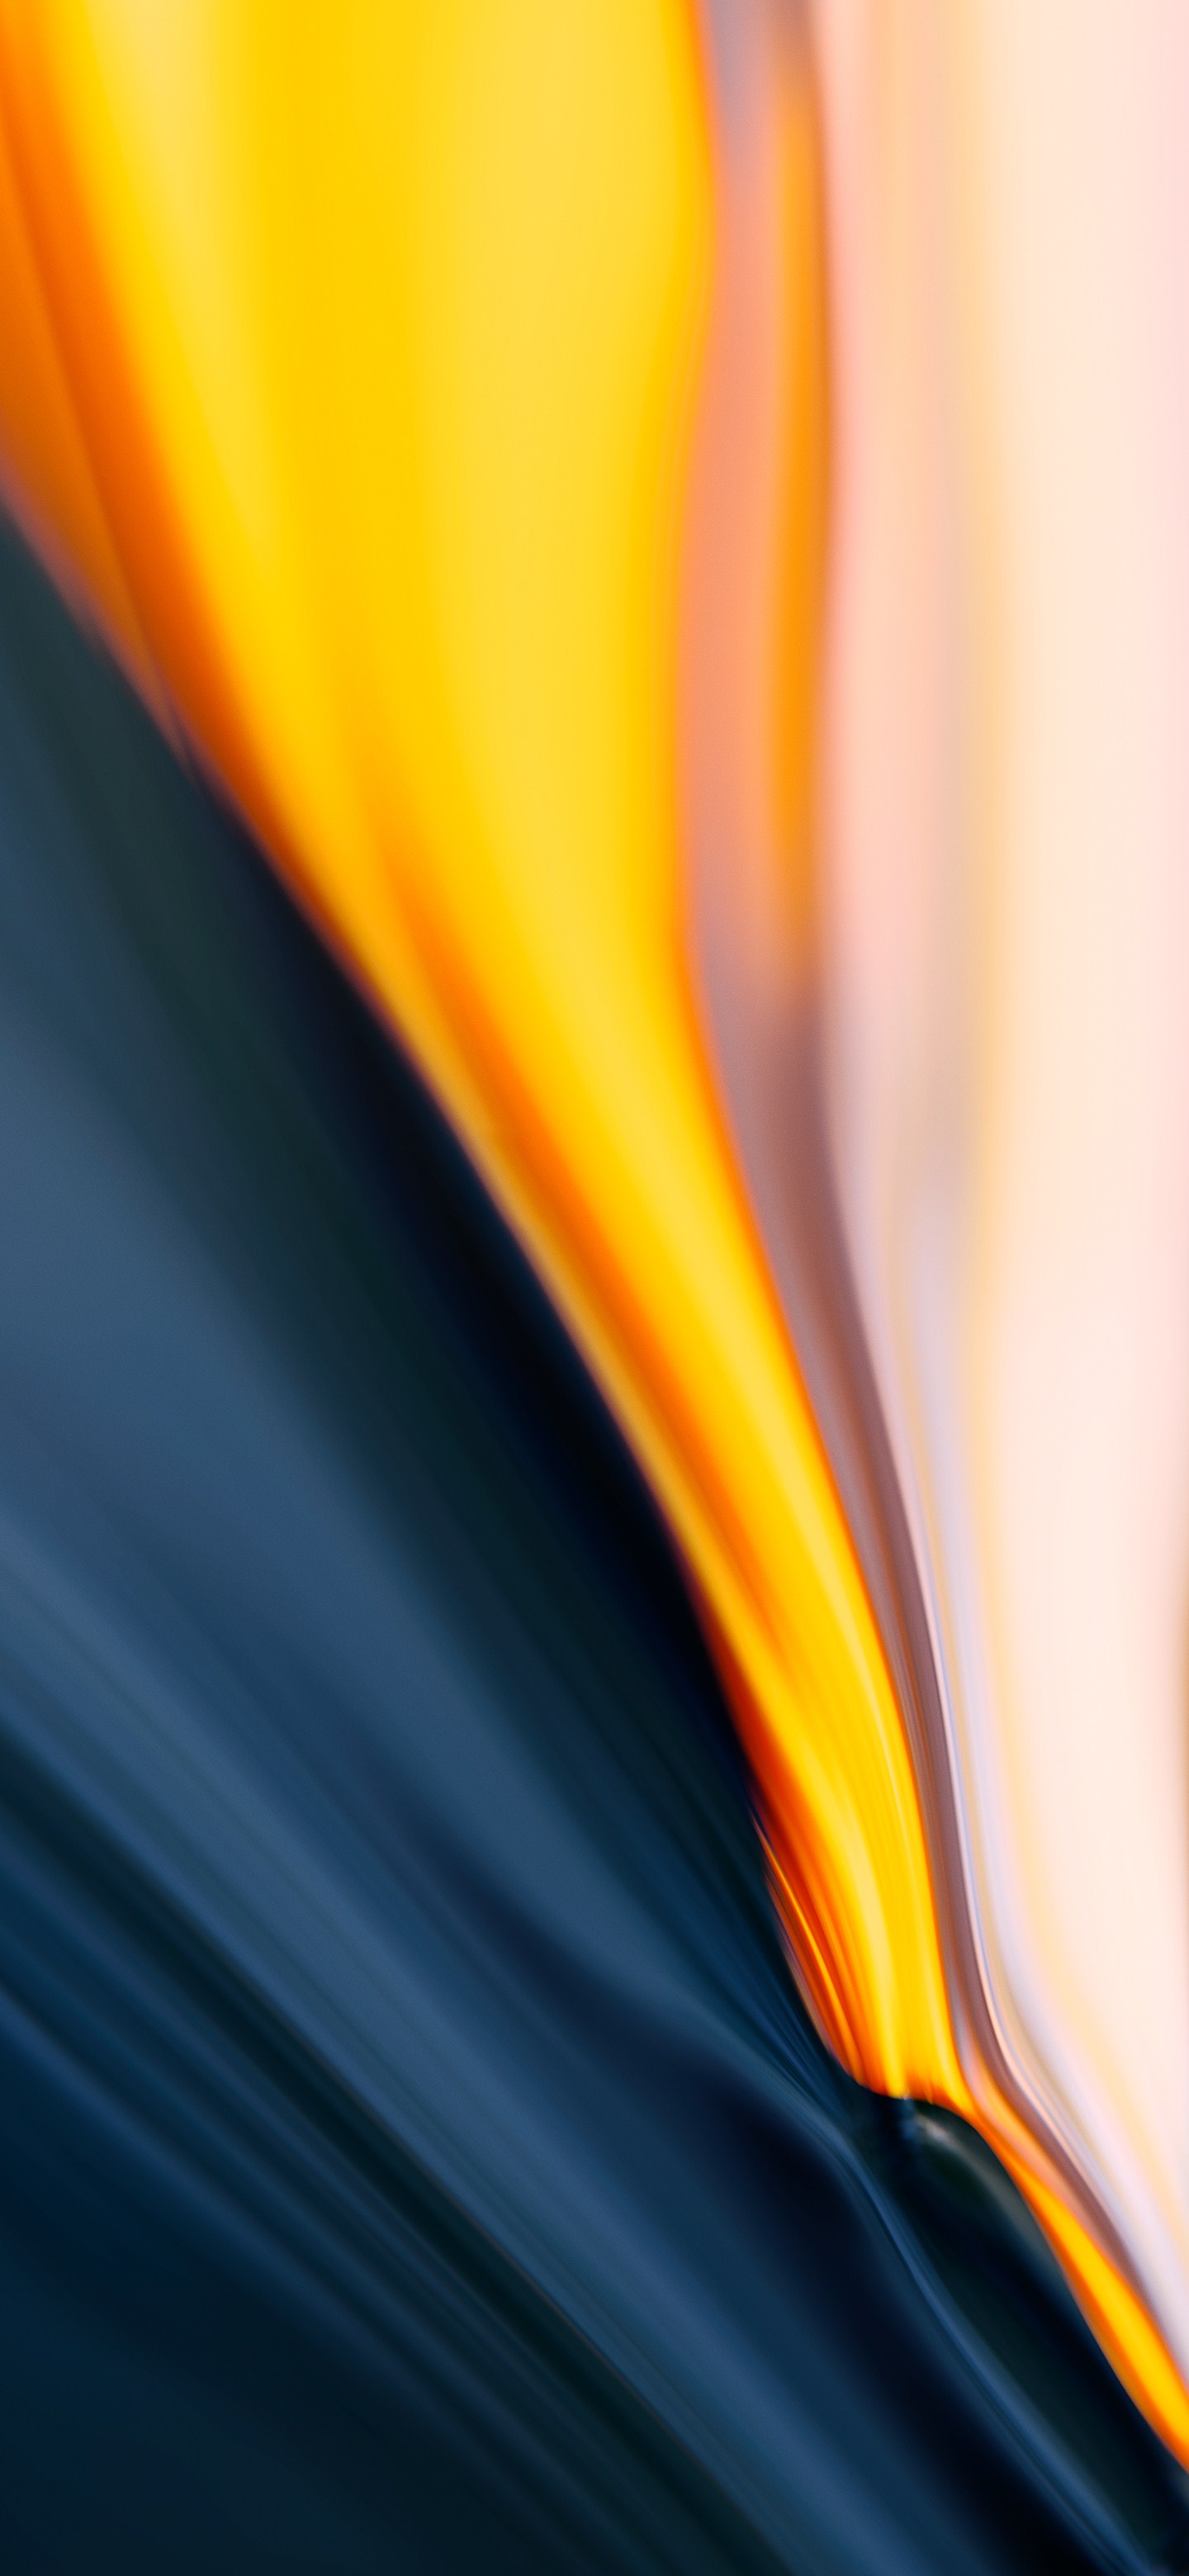 Oneplus 7 Pro Abstract Official Wallpapers - Oneplus 7 Pro Wallpaper Hd - HD Wallpaper 